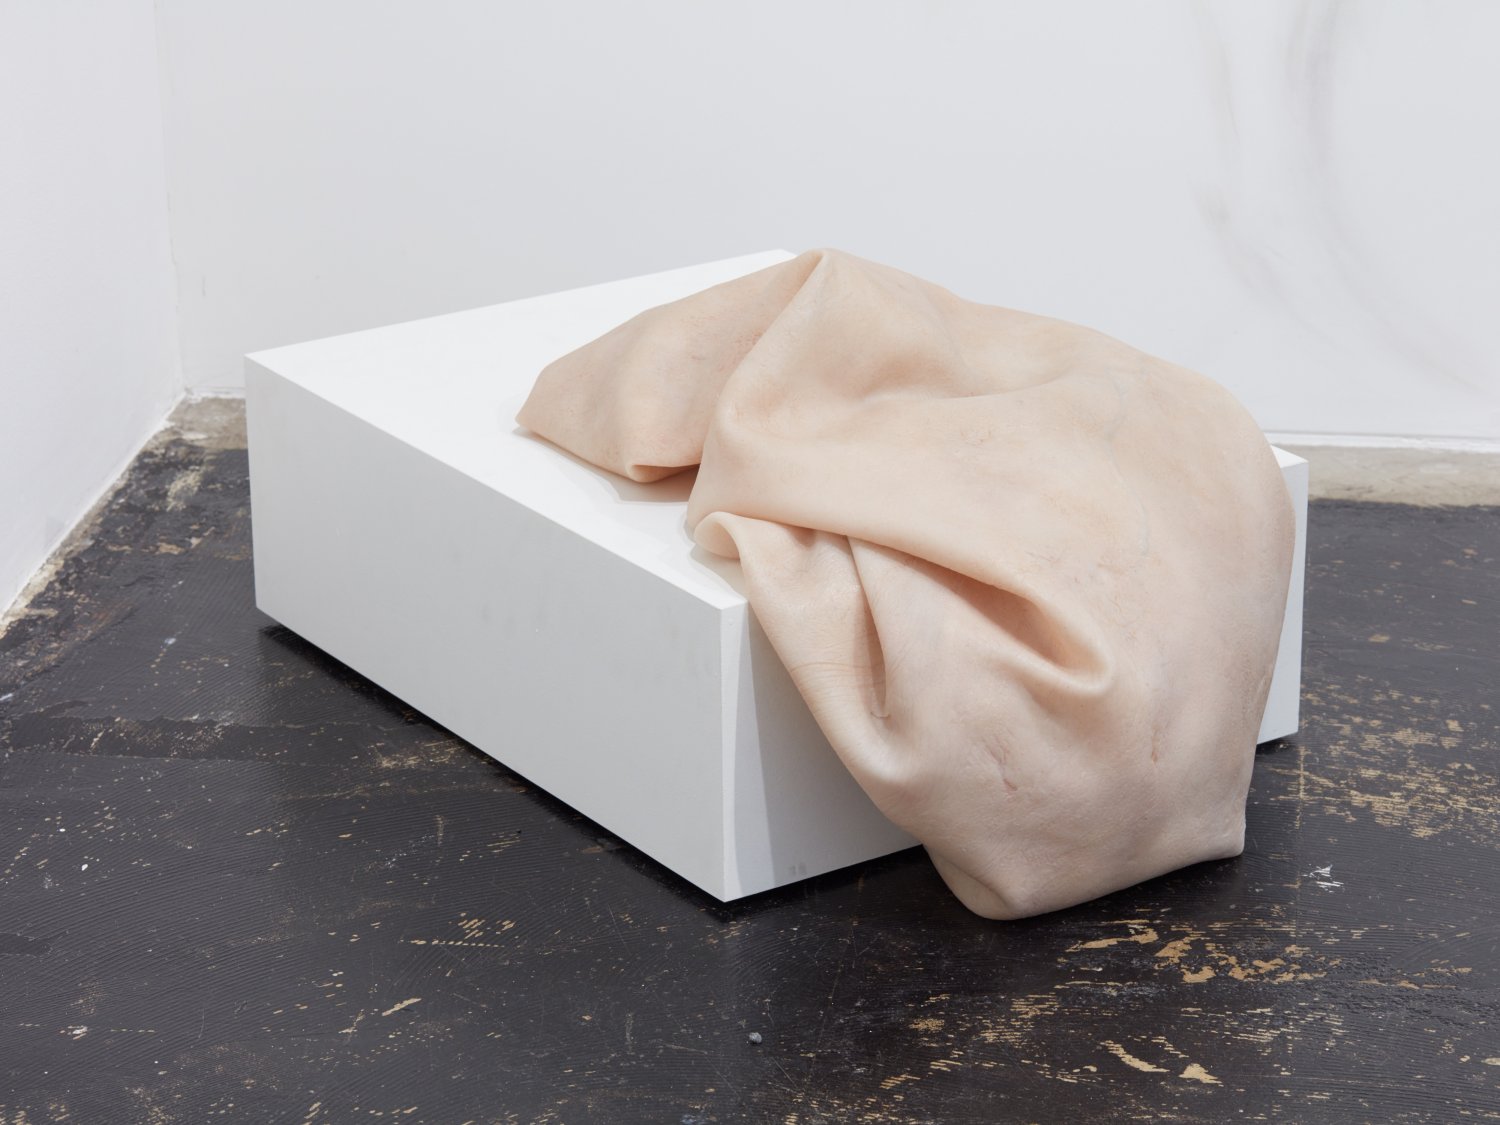 Ivana Basic, <i>In my scarred fevered skin you see the end. In your healthy flesh I see the same</i> (2016). Installation view. Photo by Ari King. Courtesy the artist and LOYAL, Stockholm